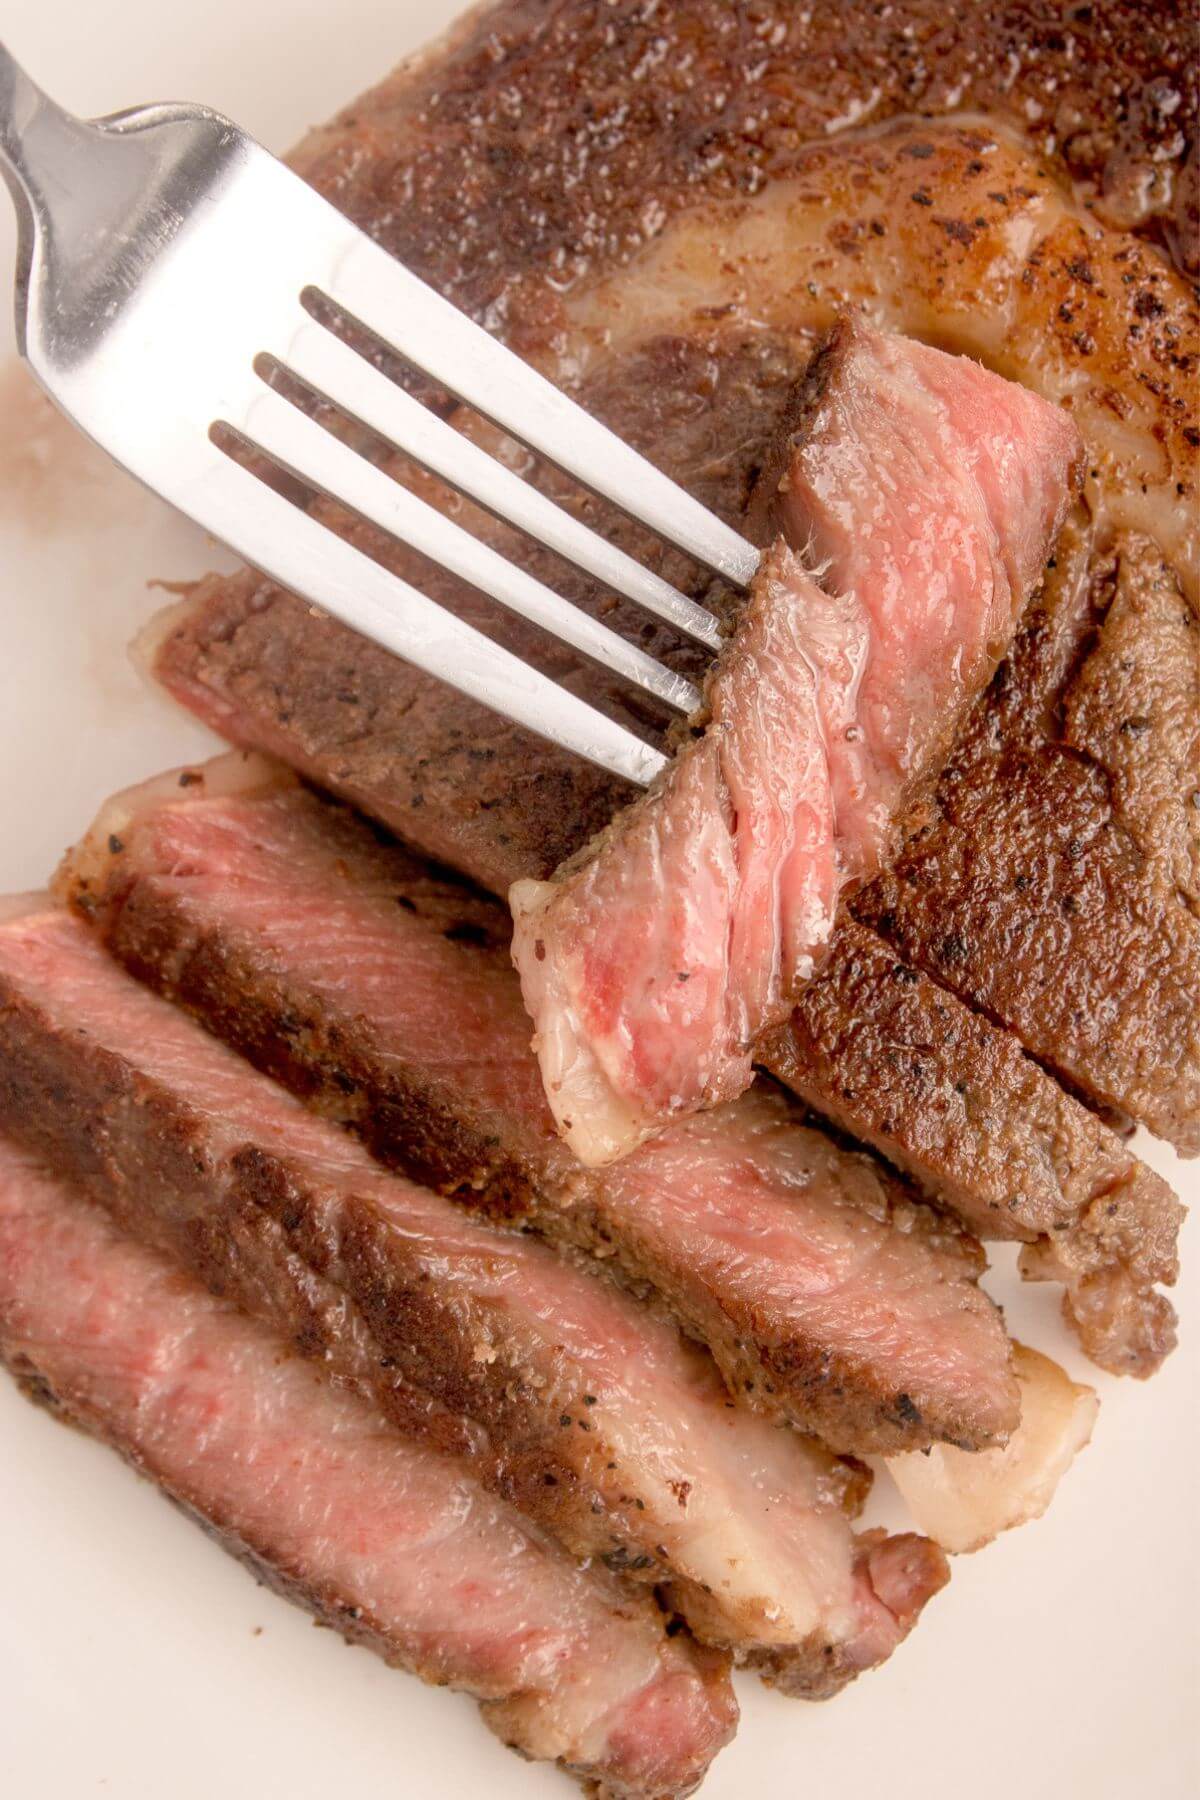 Ribeye slices pieces on plate with fork.